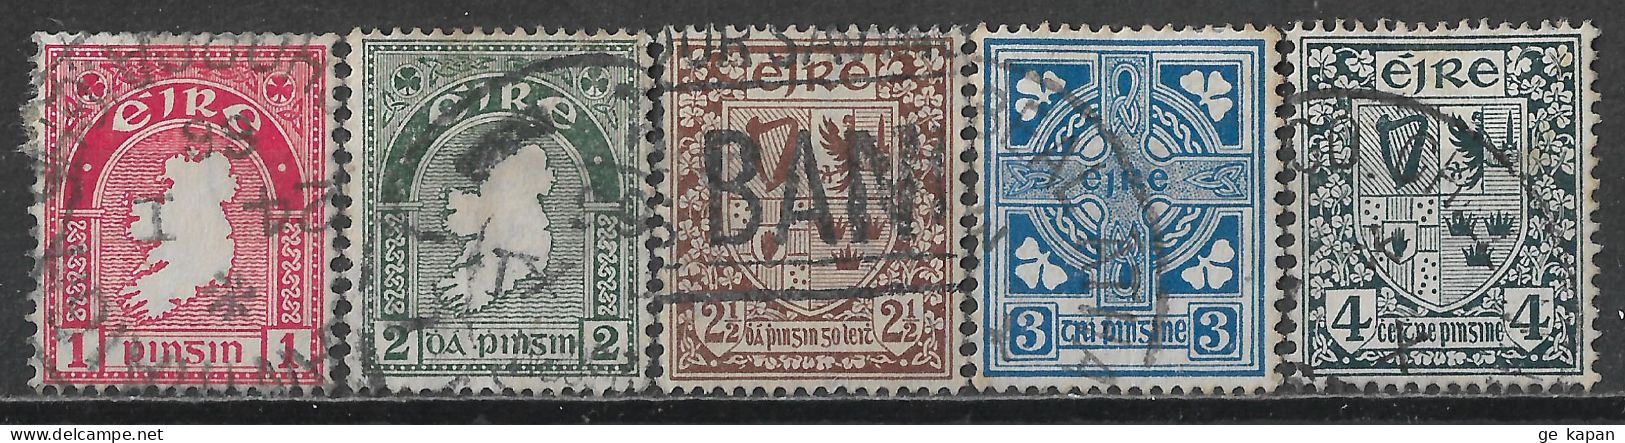 1940-1941 IRELAND SET OF 5 USED STAMPS (Michel # 72A,74A,75A,76AI,77A) CV €1.80 - Used Stamps